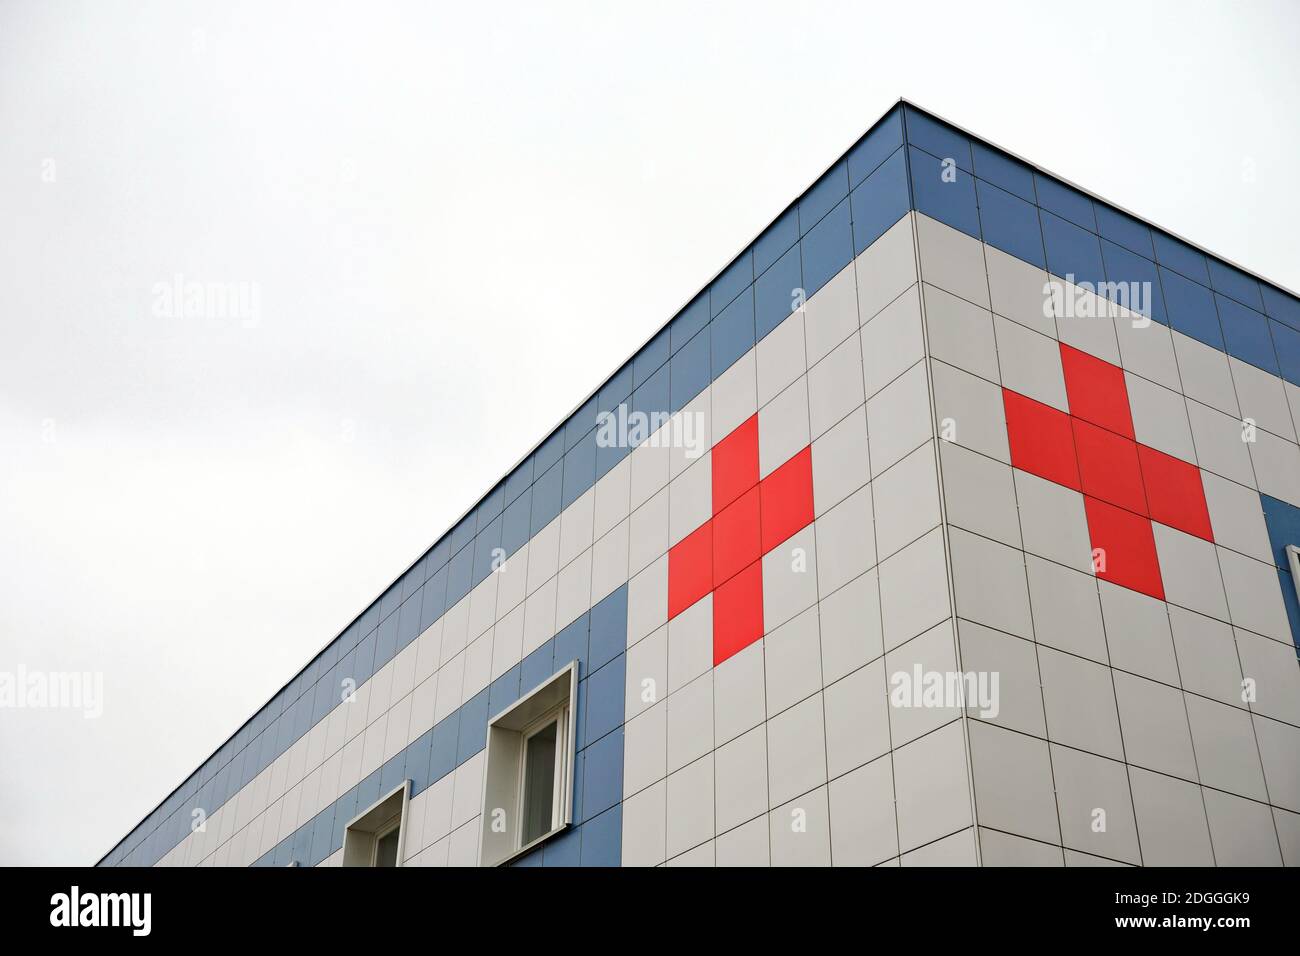 Medical symbol red cross on the cladding of the hospital building against the background of the cloudy sky. Stock Photo